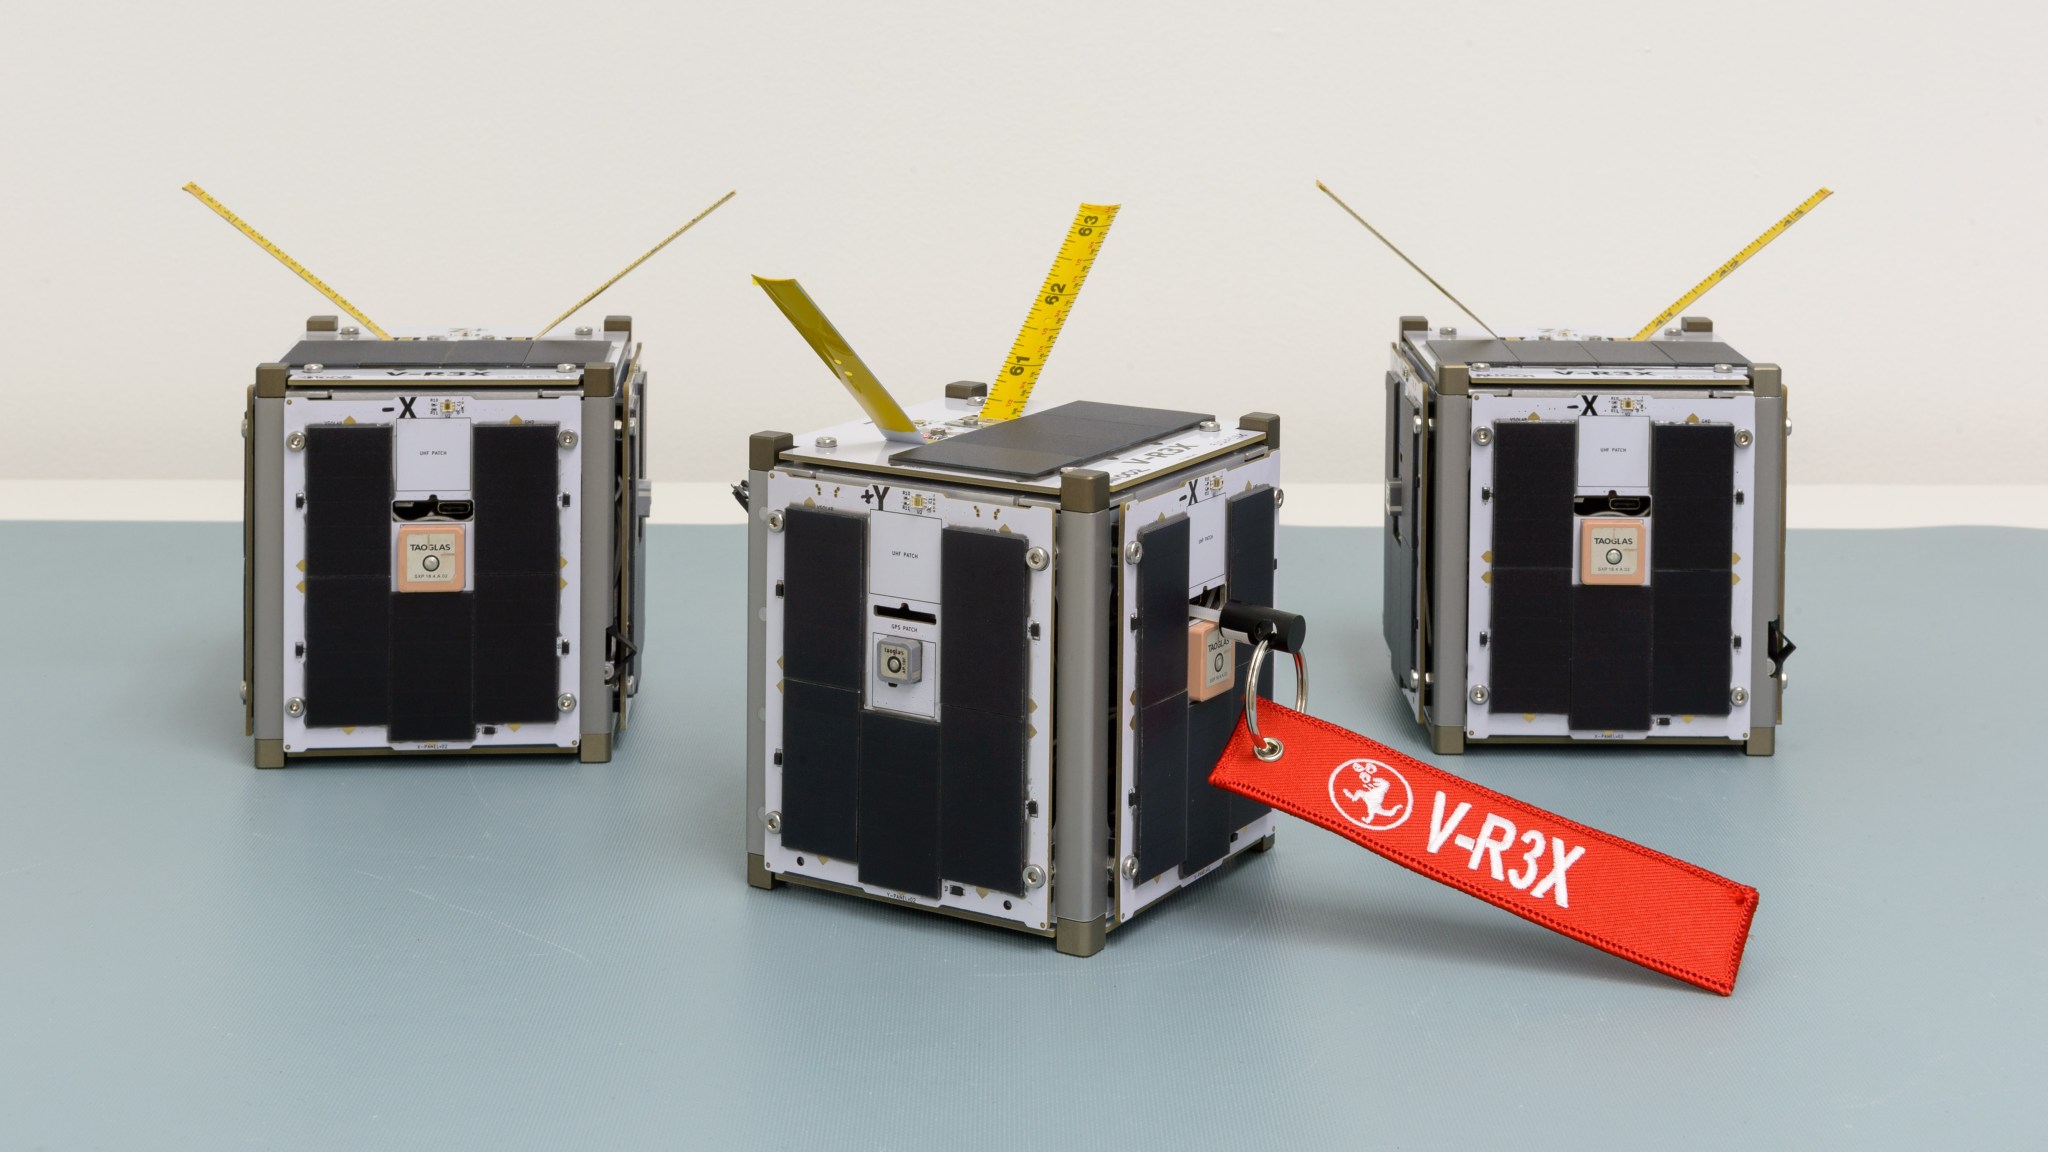 Three small cube-shaped devices, one with a red tag that reads 'V-R3x'.